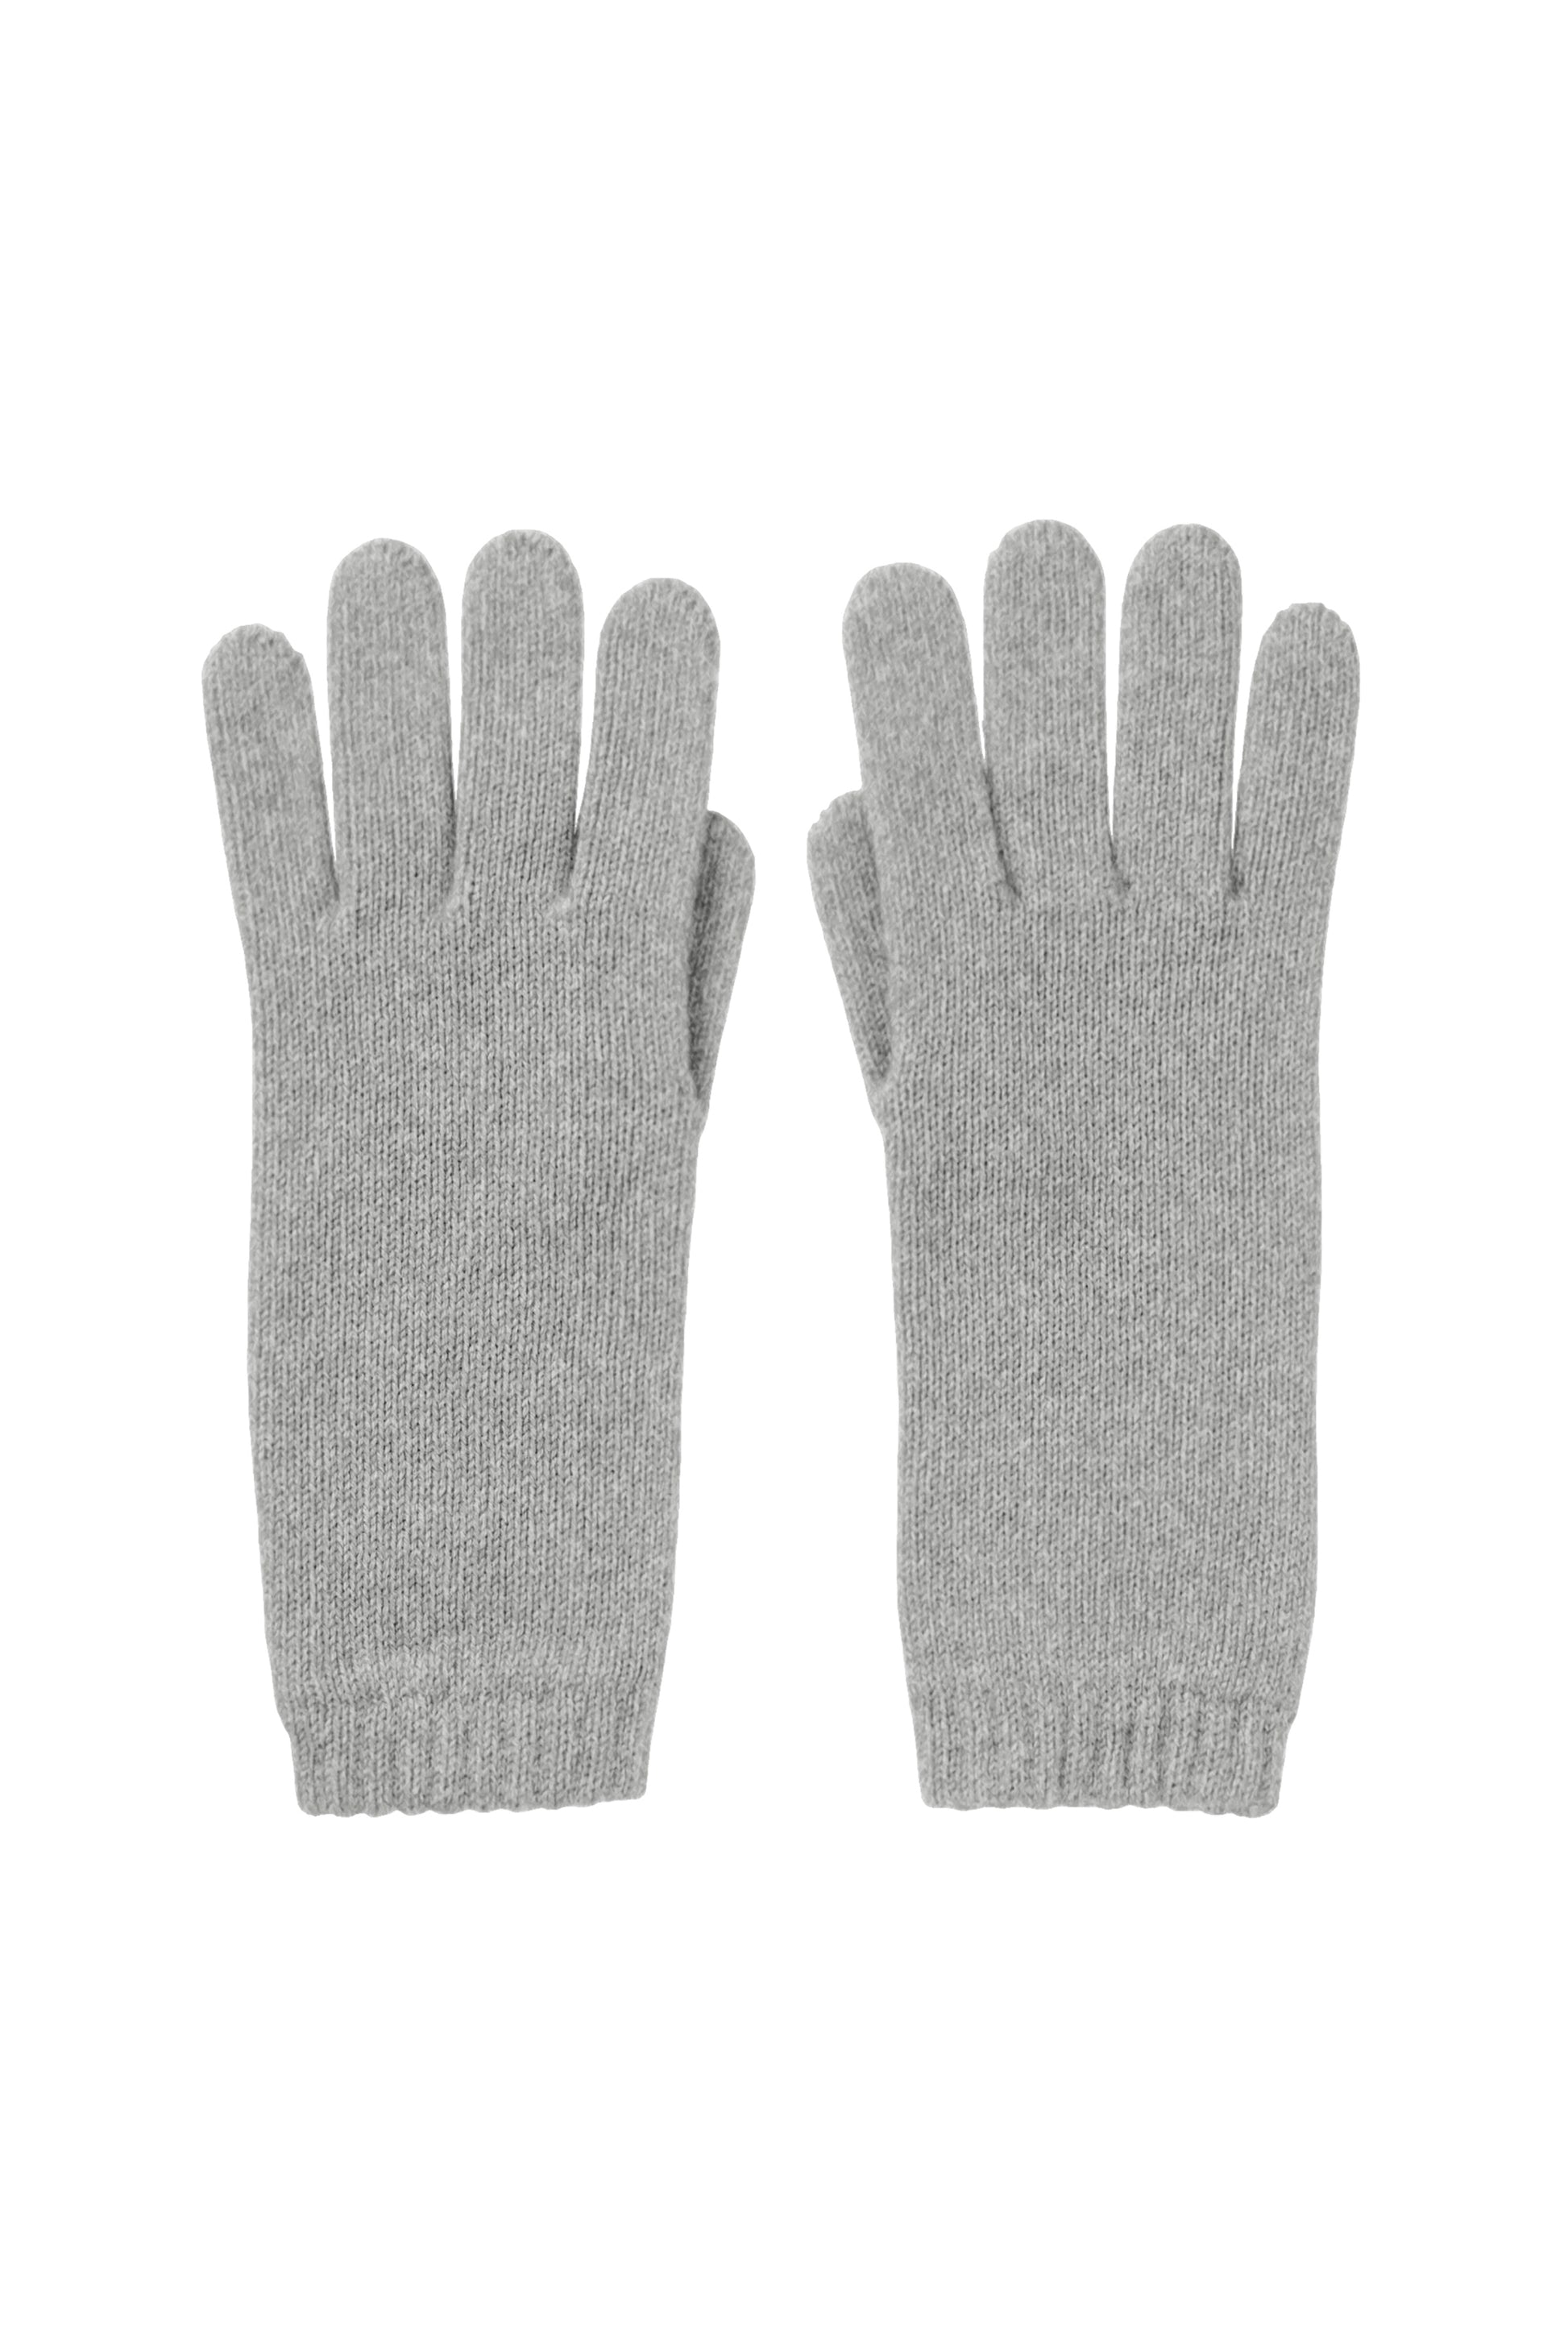 Johnstons of Elgin AW24 Knitted Accessory Light Grey Women's Cashmere Gloves HAD03226HA0308ONE